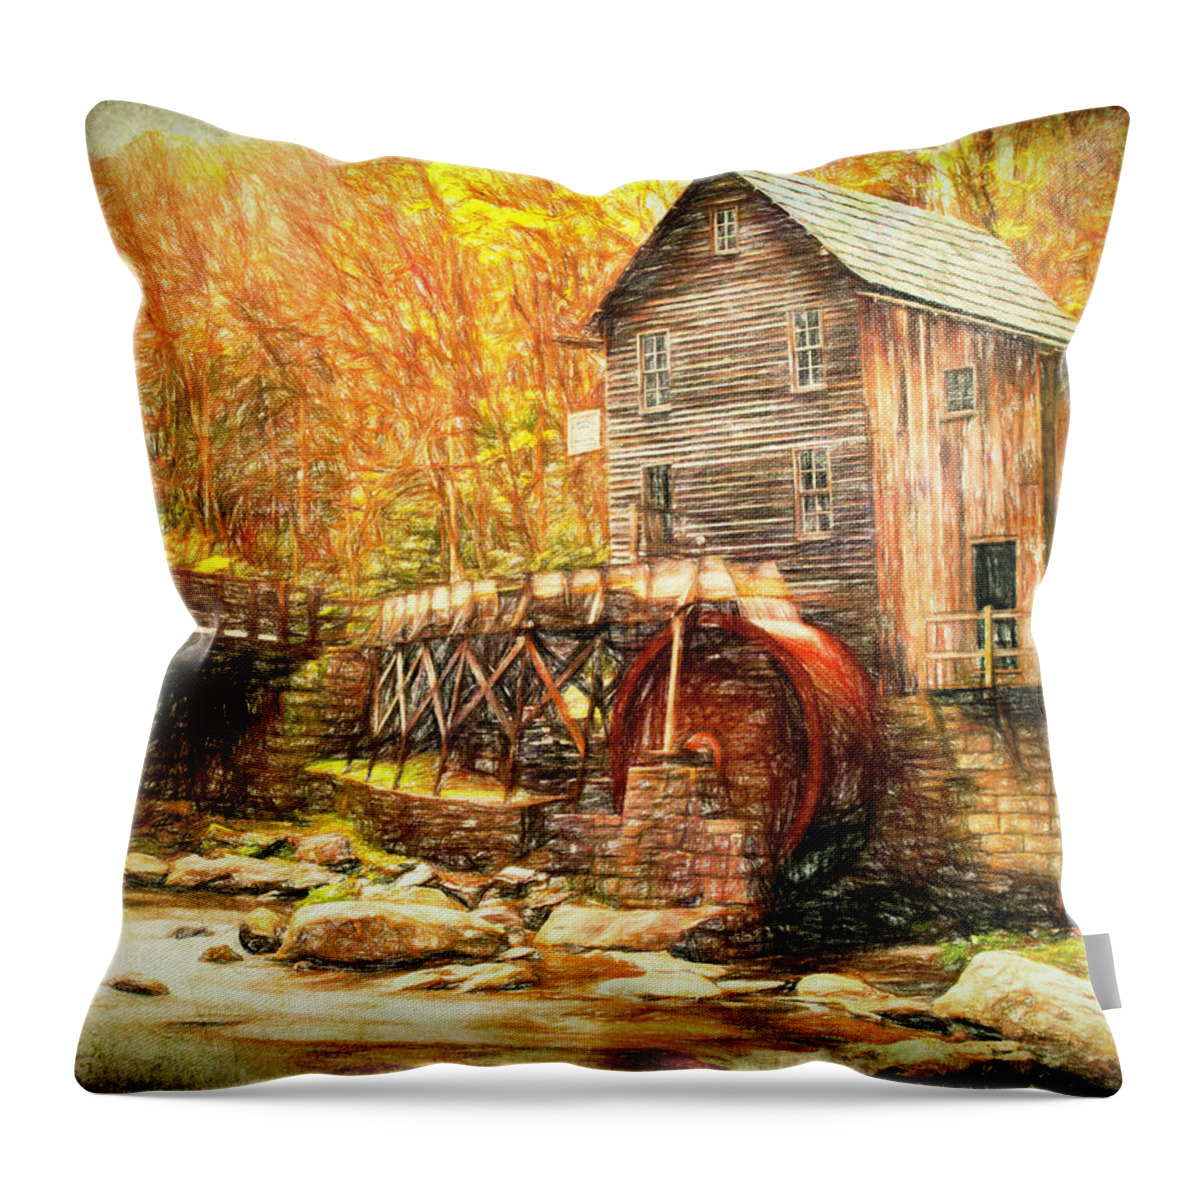 Grist Mill Throw Pillow featuring the photograph Old Grist Mill by Mark Allen